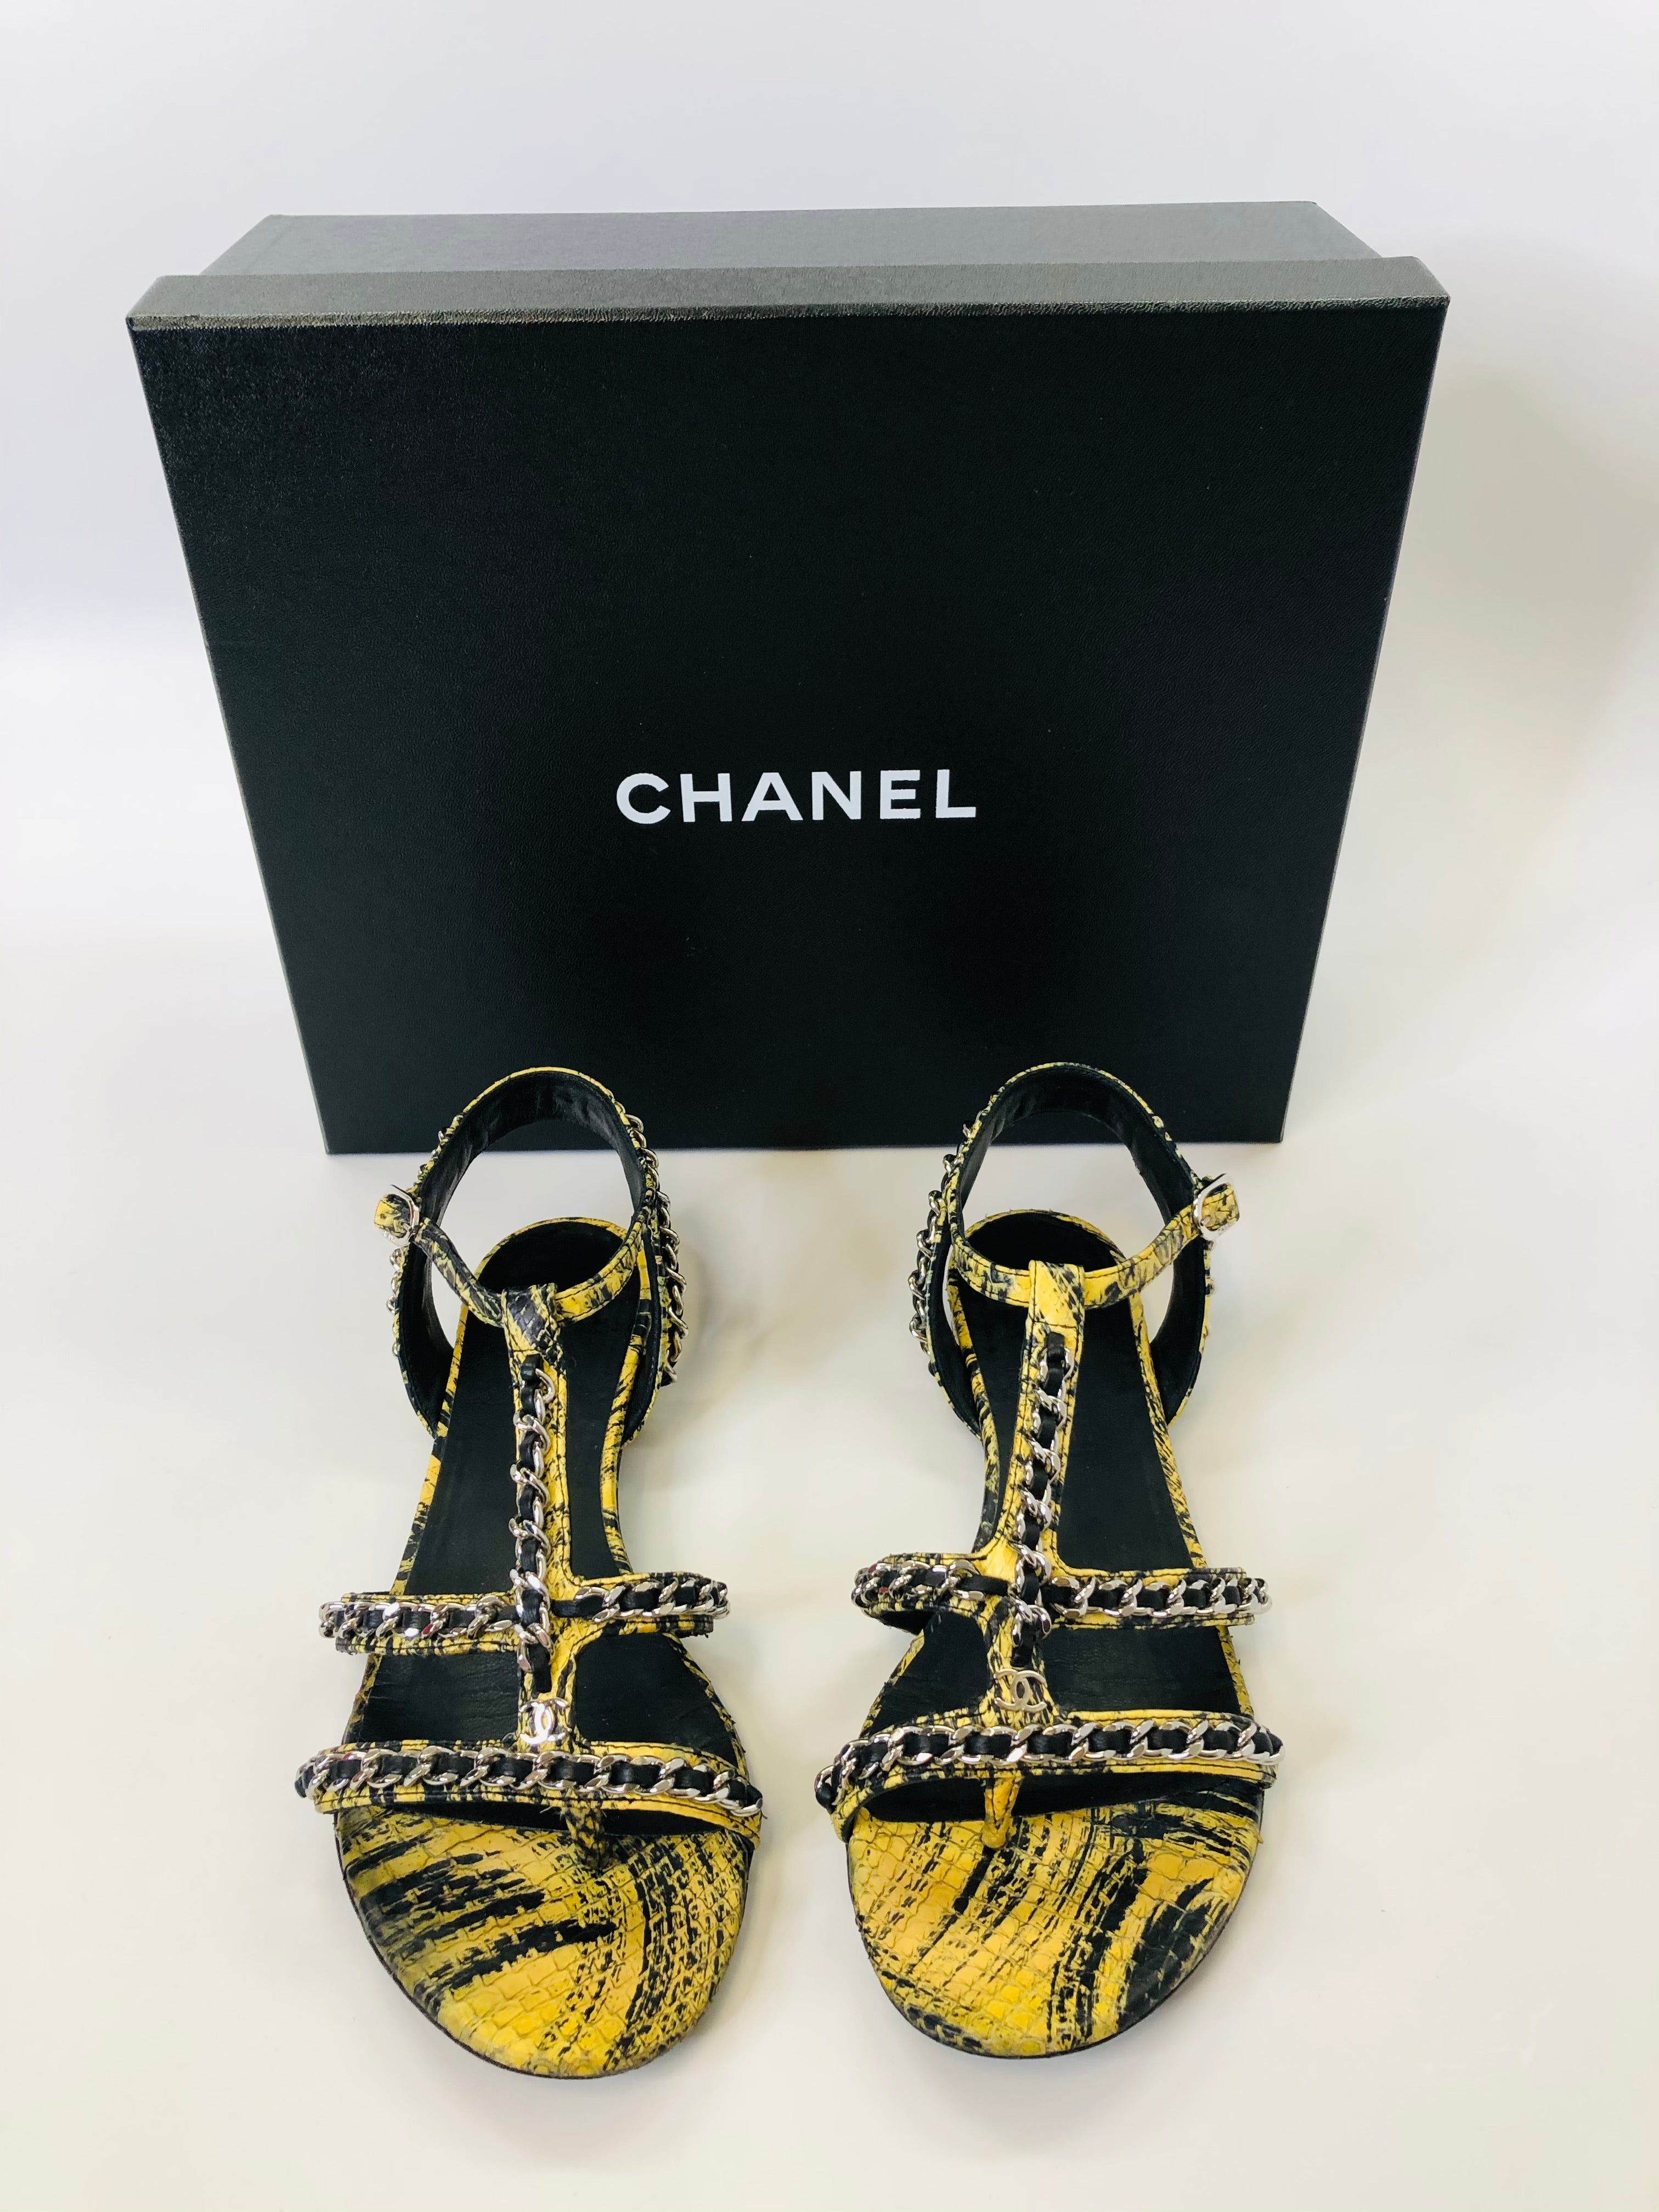 NWT CHANEL 20P Leather Chain CC Thong Flats Sandals Shoes Black 35